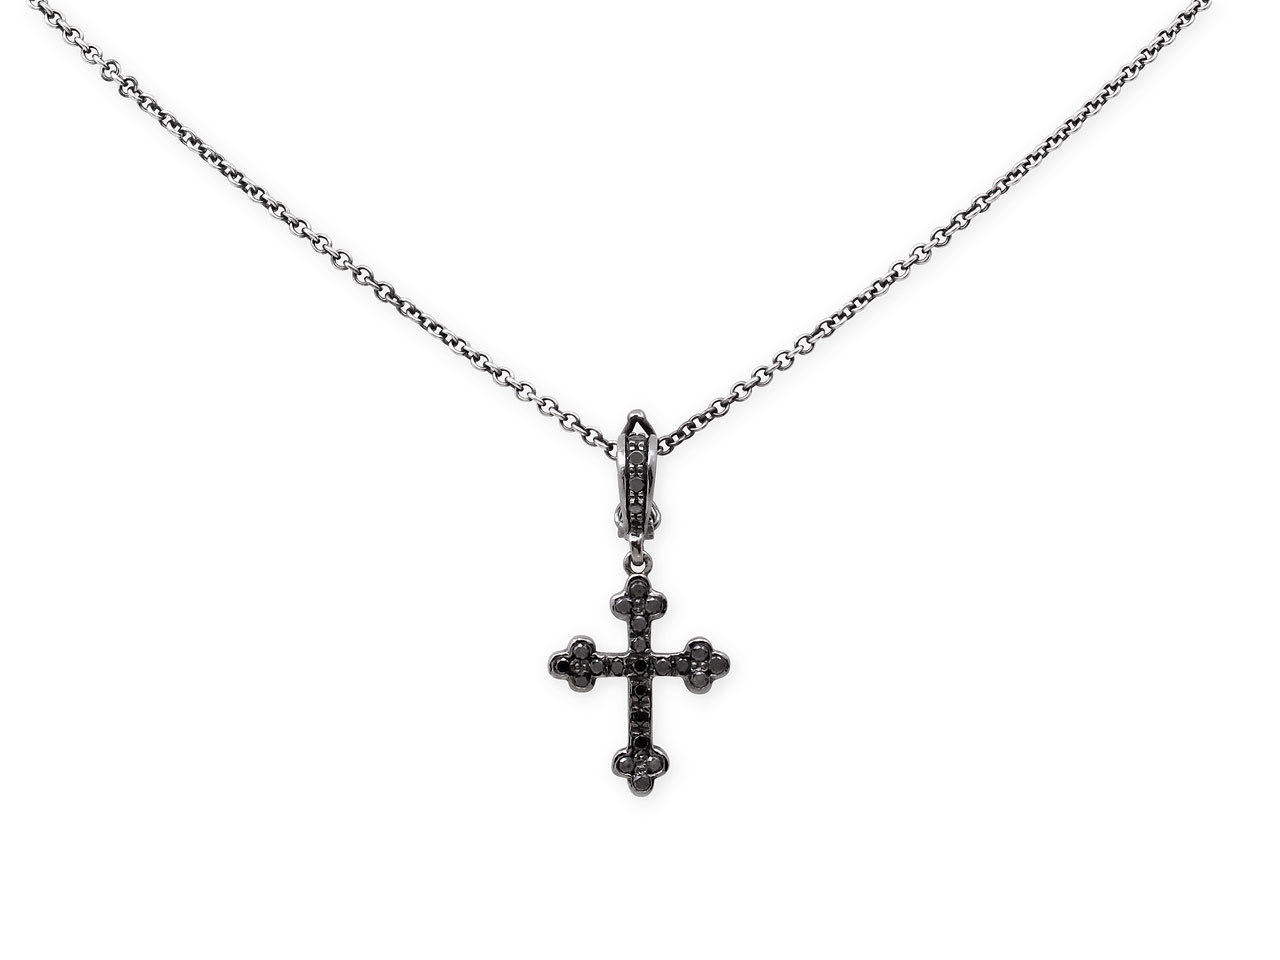 Buy 0.90 Carat (ctw) Round Black Diamond Mens Religious Cross Pendant, Black  Plated Sterling Silver Online at Dazzling Rock